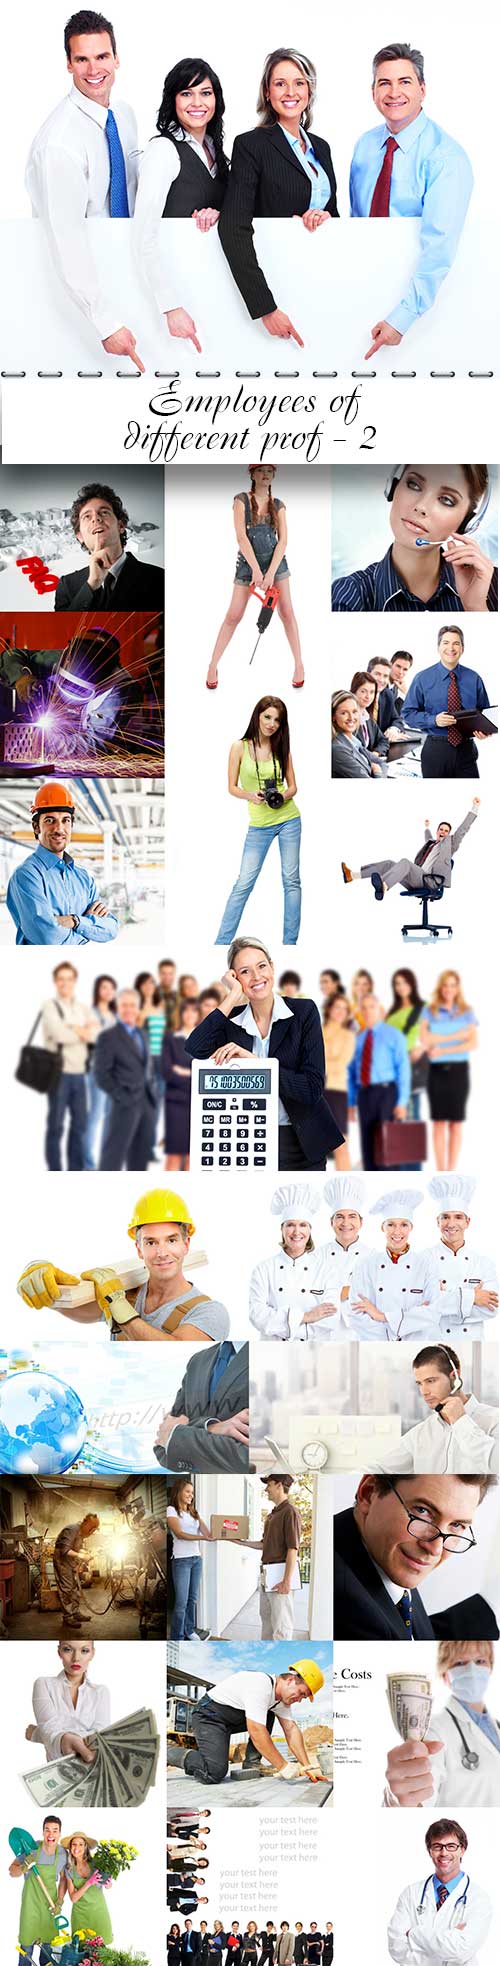 Employees of different profile - 2